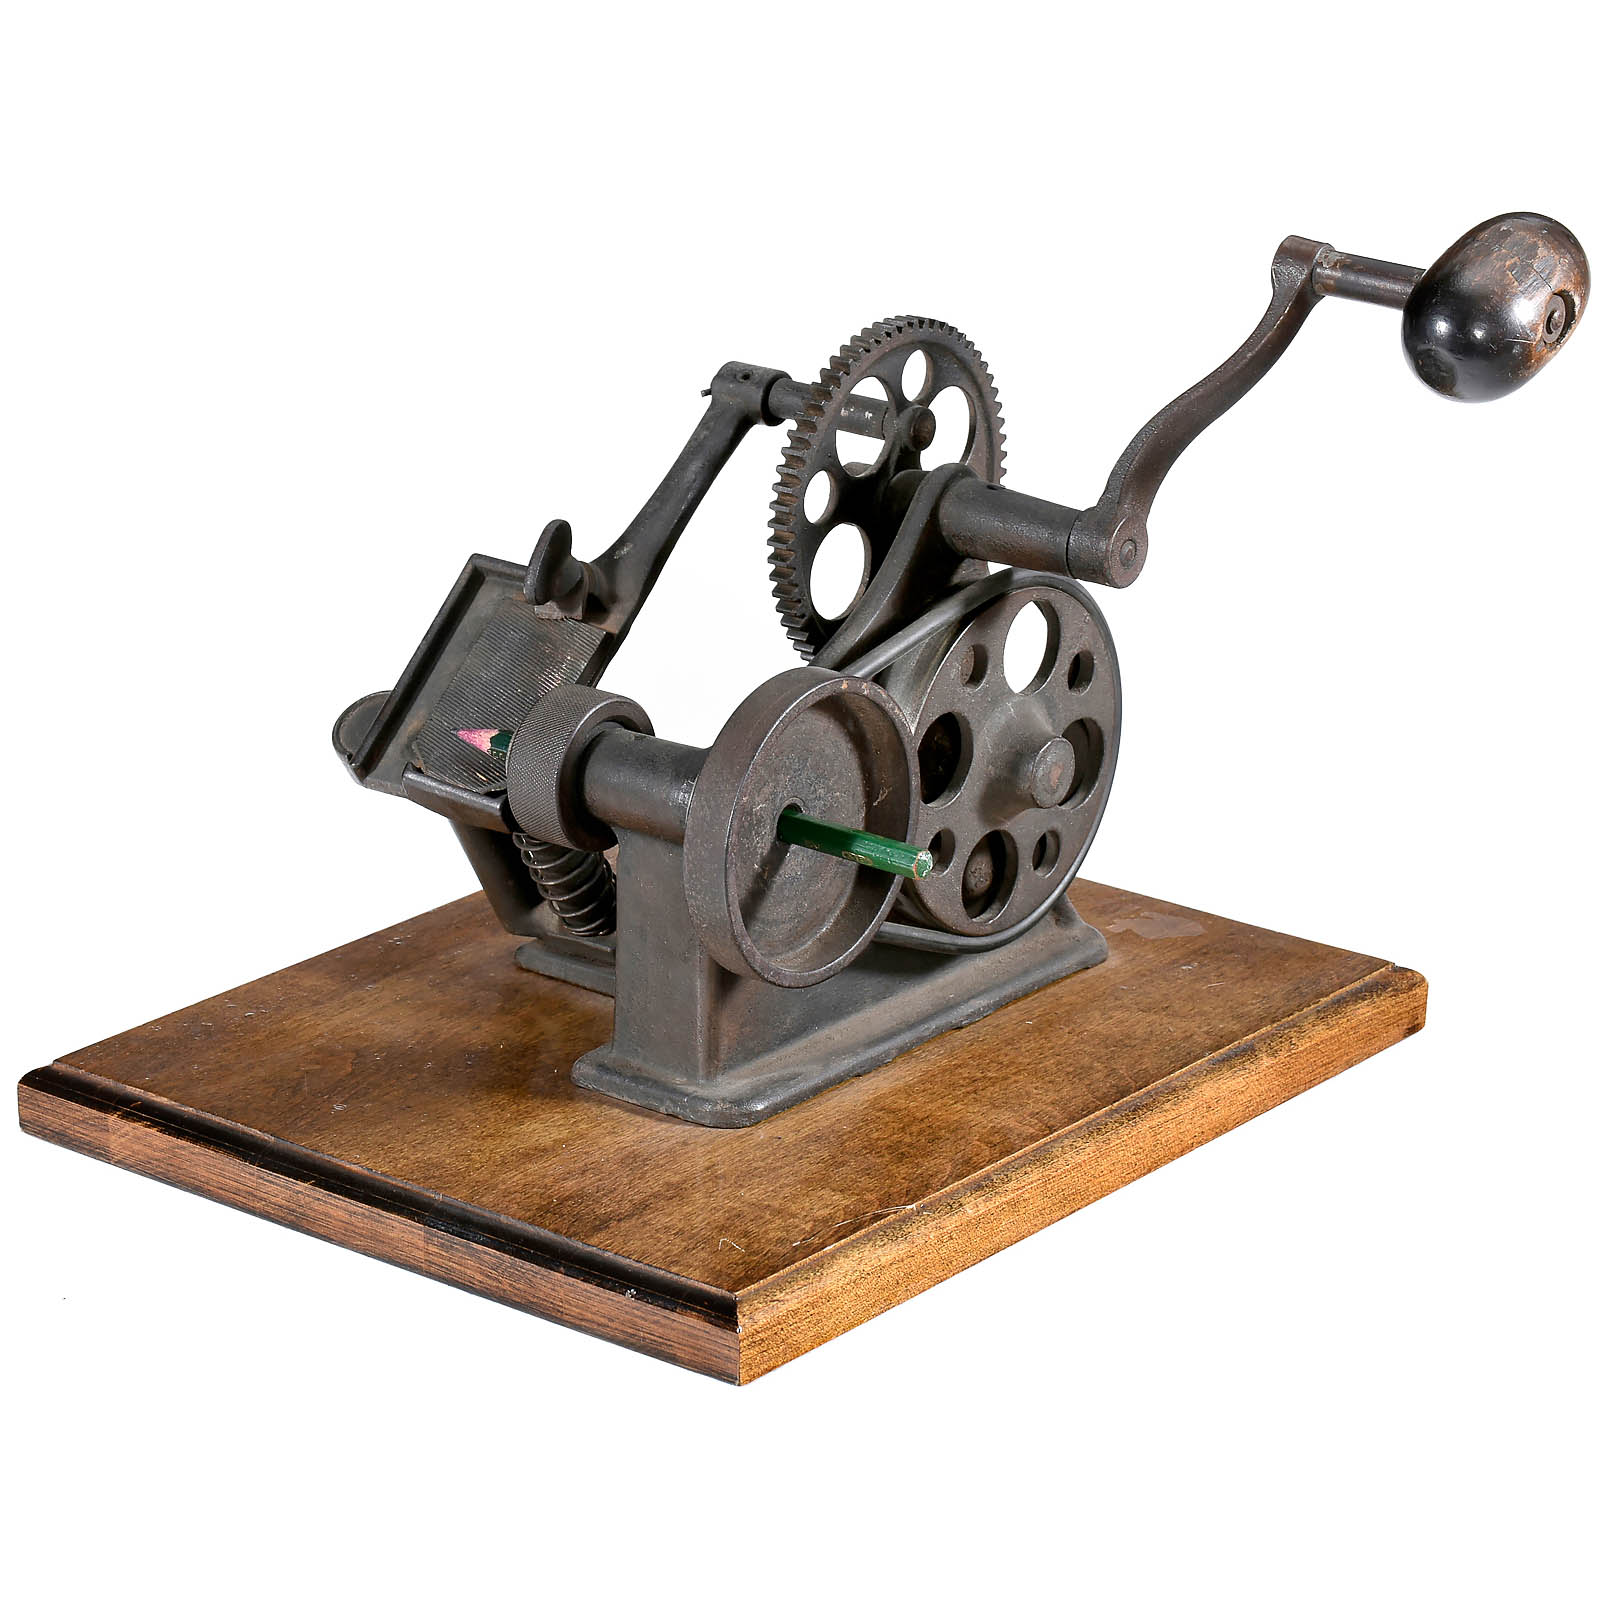 Pencil Sharpener by E.S. Stimpson, 1884
Early cast-iron machine, patented in the U.S. under no. - Image 3 of 5